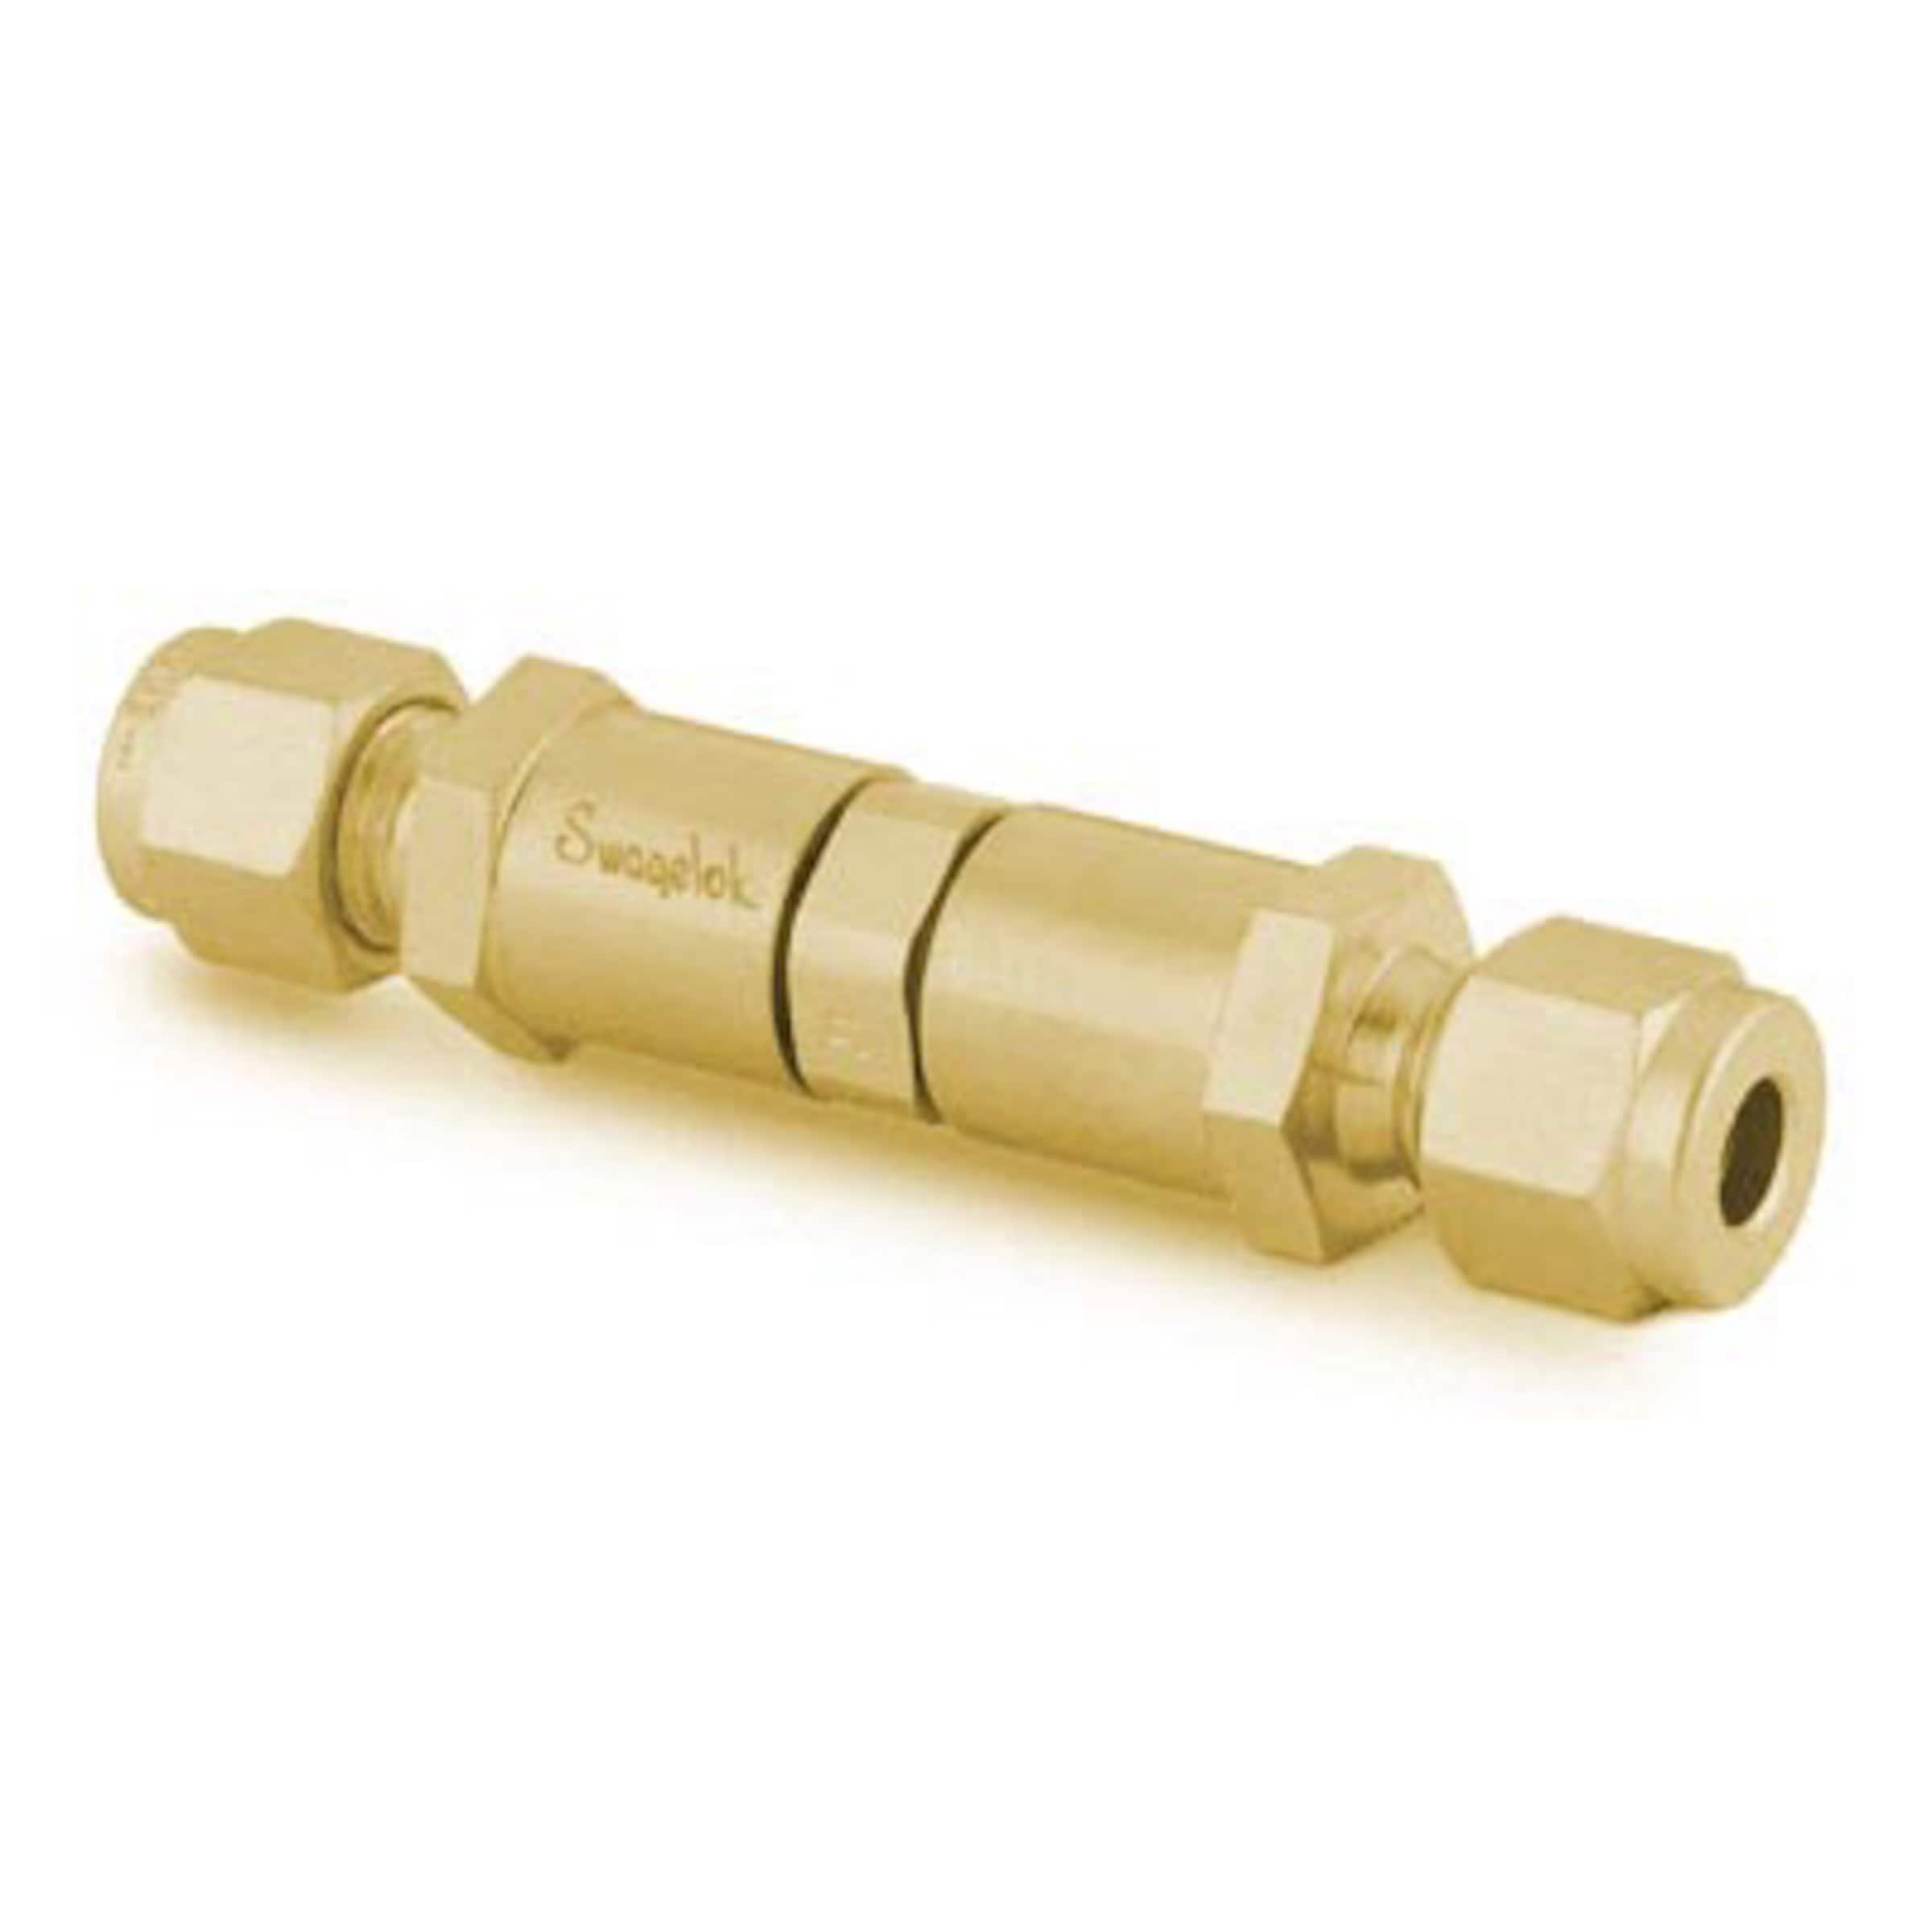 Brass Poppet Check Valve, Adjustable Pressure, 1/4 in. Swagelok Tube  Fitting, 3 to 50 psig (0.21 to 3.5 bar), Poppet Check Valves, C, CP, CH  Series, Check Valves, Valves, All Products